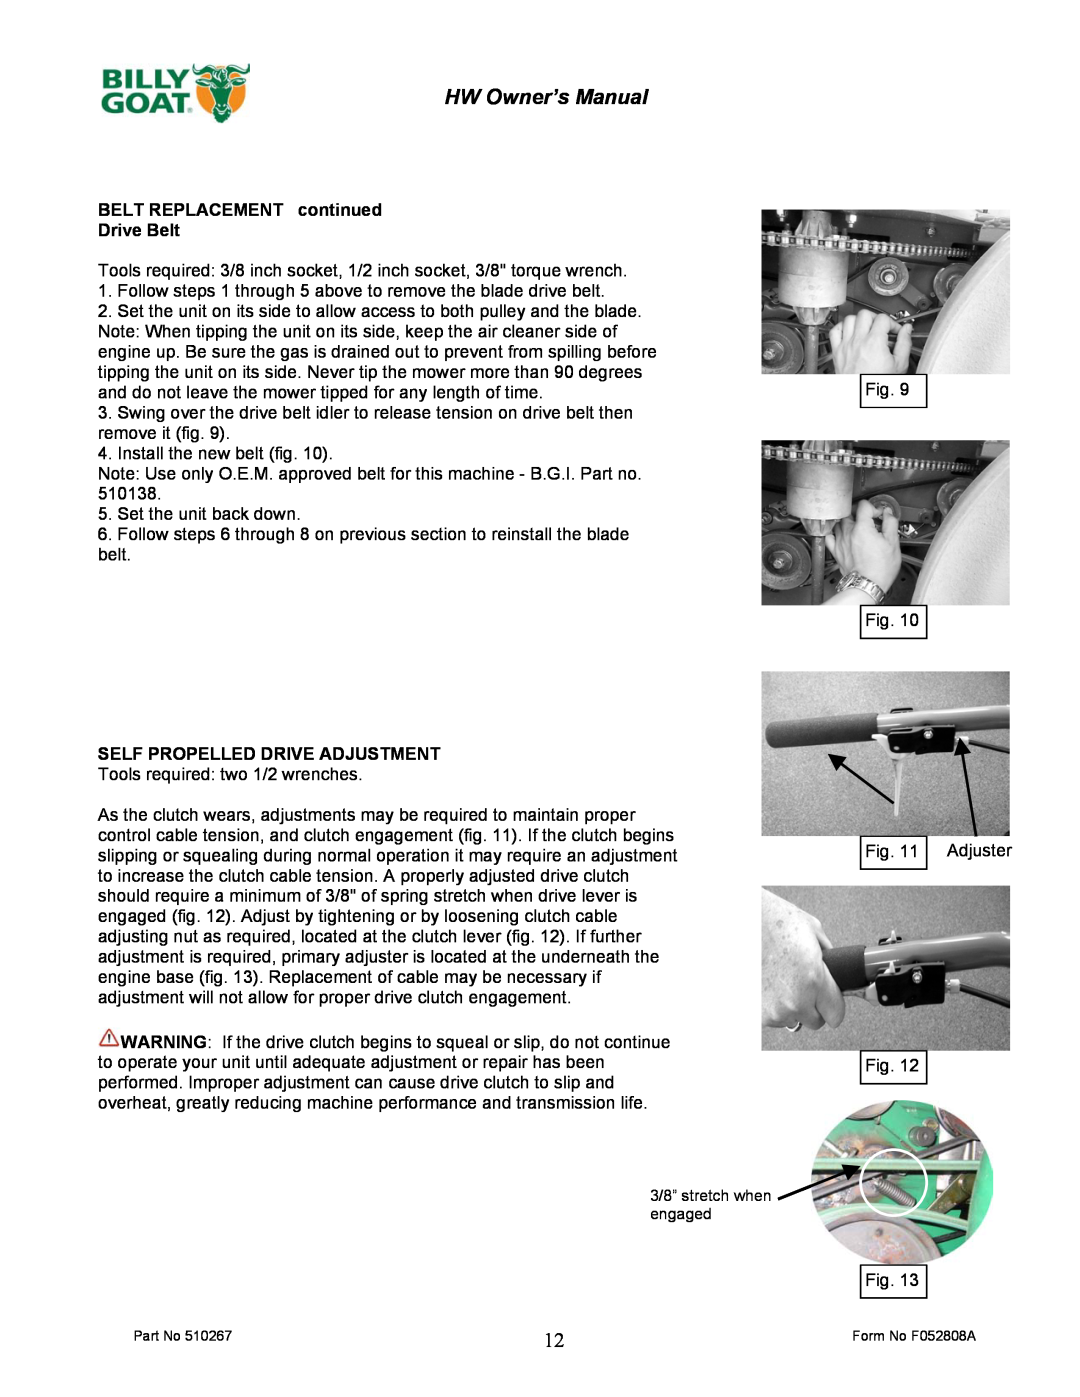 Billy Goat HW651HSP owner manual BELT REPLACEMENT continued Drive Belt, Self Propelled Drive Adjustment 